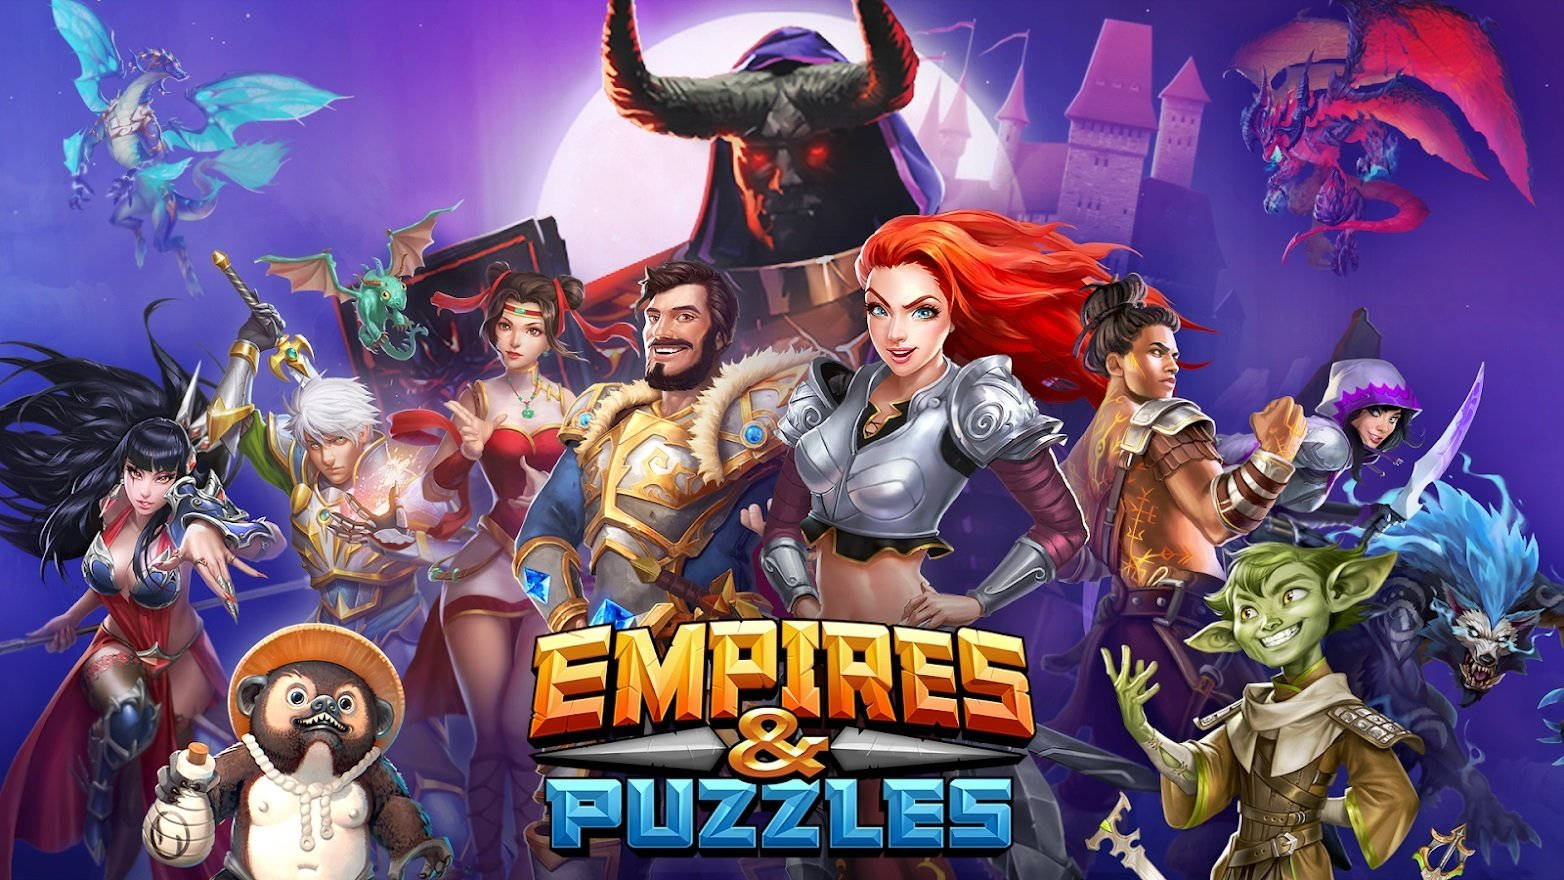 Empires & Puzzles Game Background